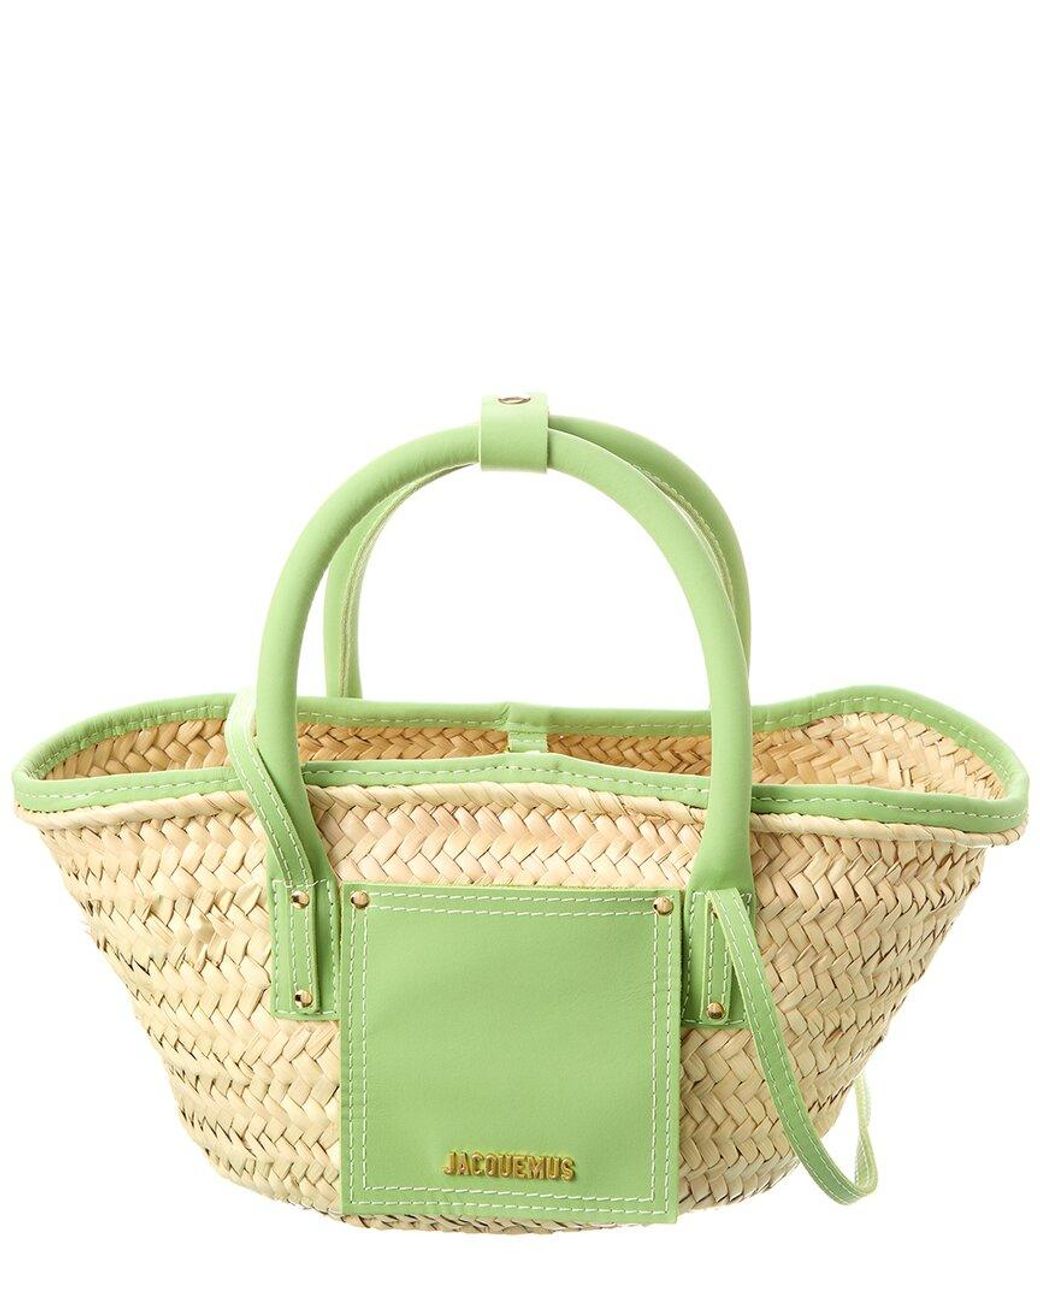 Jacquemus Le Petit Panier Soli Straw & Leather Tote in Green | Lyst